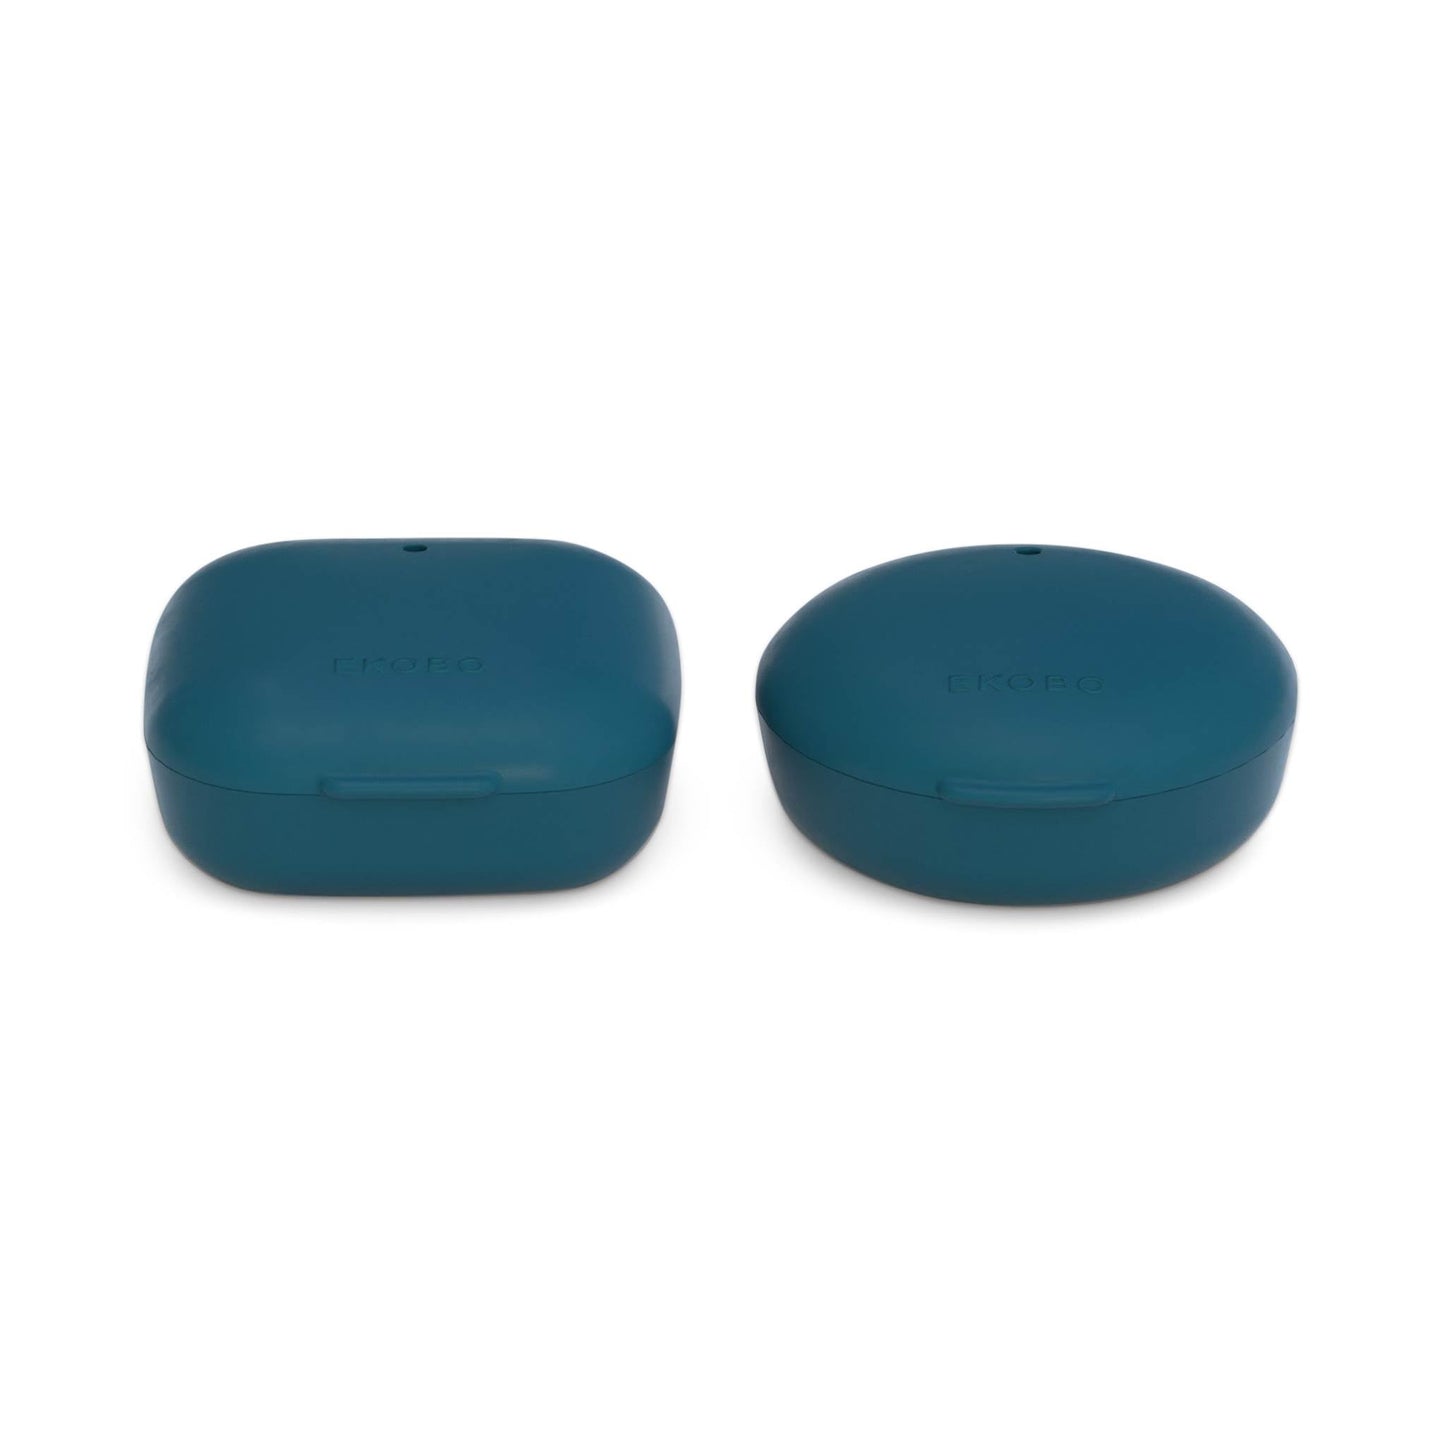 Faerly Soap Dishes & Holders Duo of Travel Soap Boxes - Blue Abyss - Ekobo